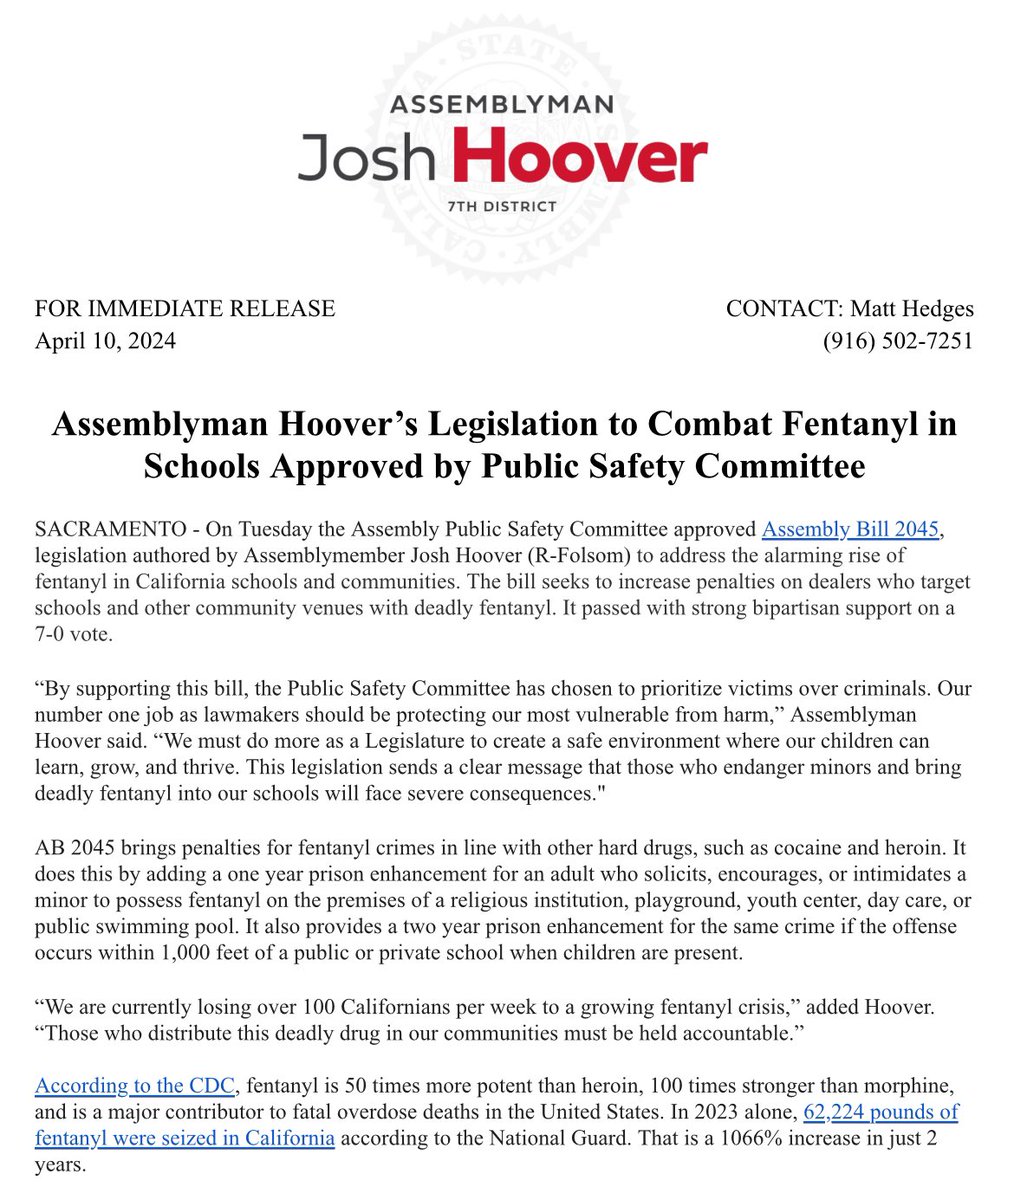 The Assembly Public Safety Committee has approved my bill to increase penalties on dealers who target our schools and communities with deadly fentanyl. I am grateful for the strong bipartisan support of #AB2045, this is a huge win for the safety of our students.